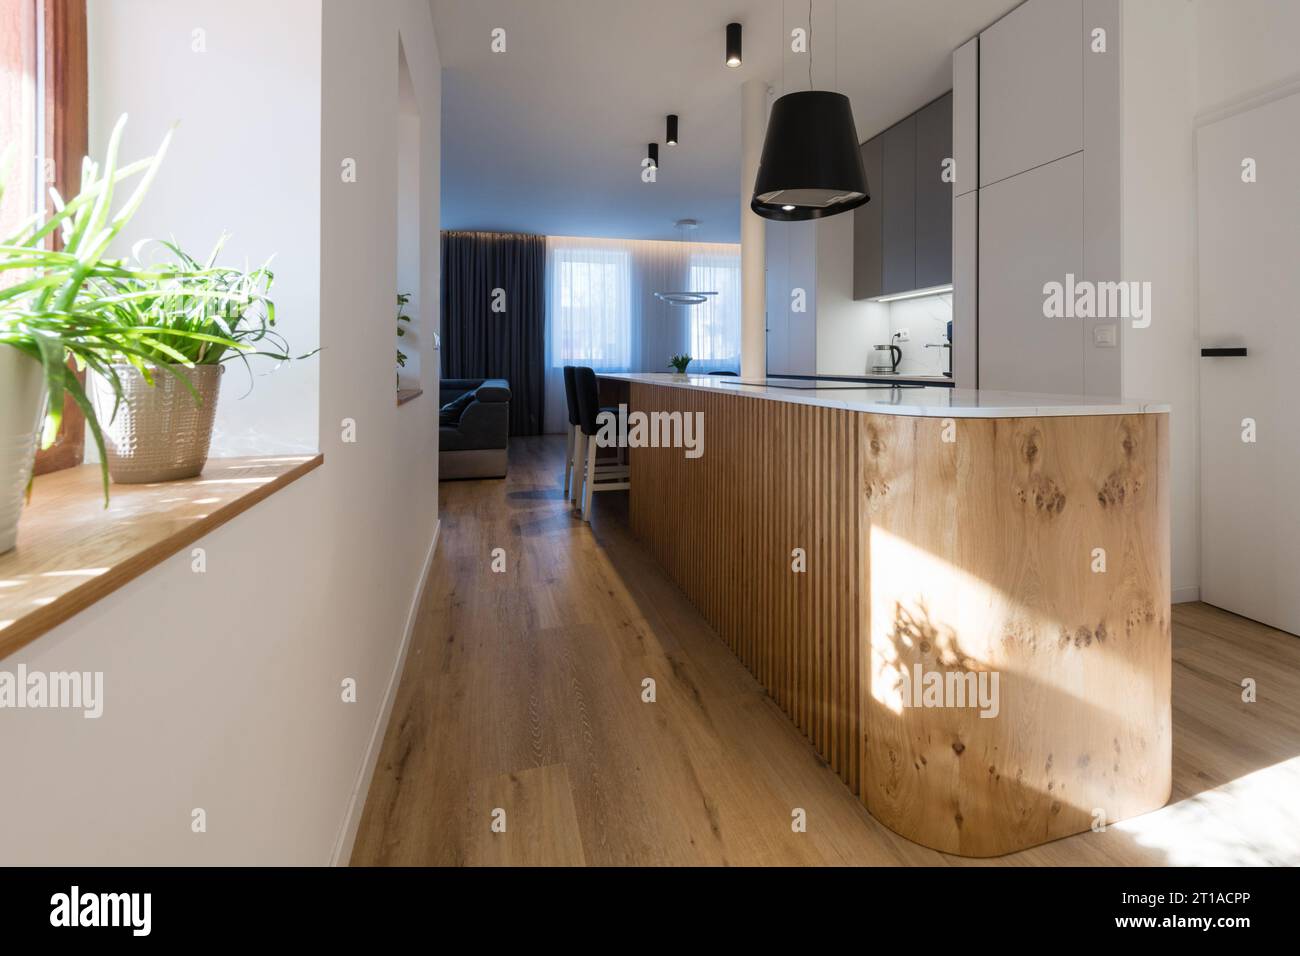 Interior of kitchen with island in modern house Stock Photo